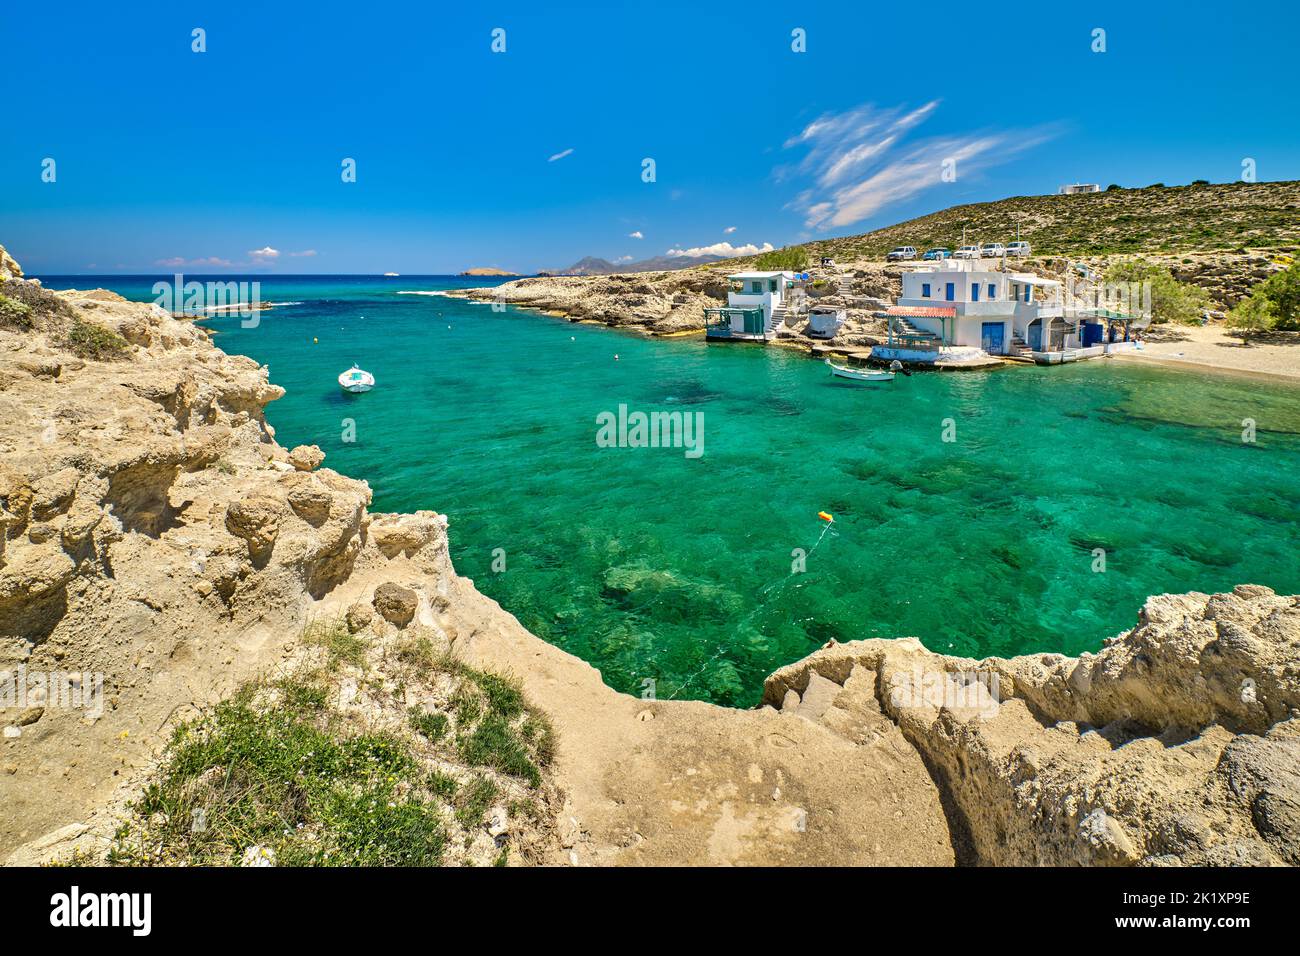 Beautiful view of secluded Mediterranean island bay on summer day. Whitewashed houses, hills, clear sky, azure sea waters, beach. Milos, Greece Stock Photo